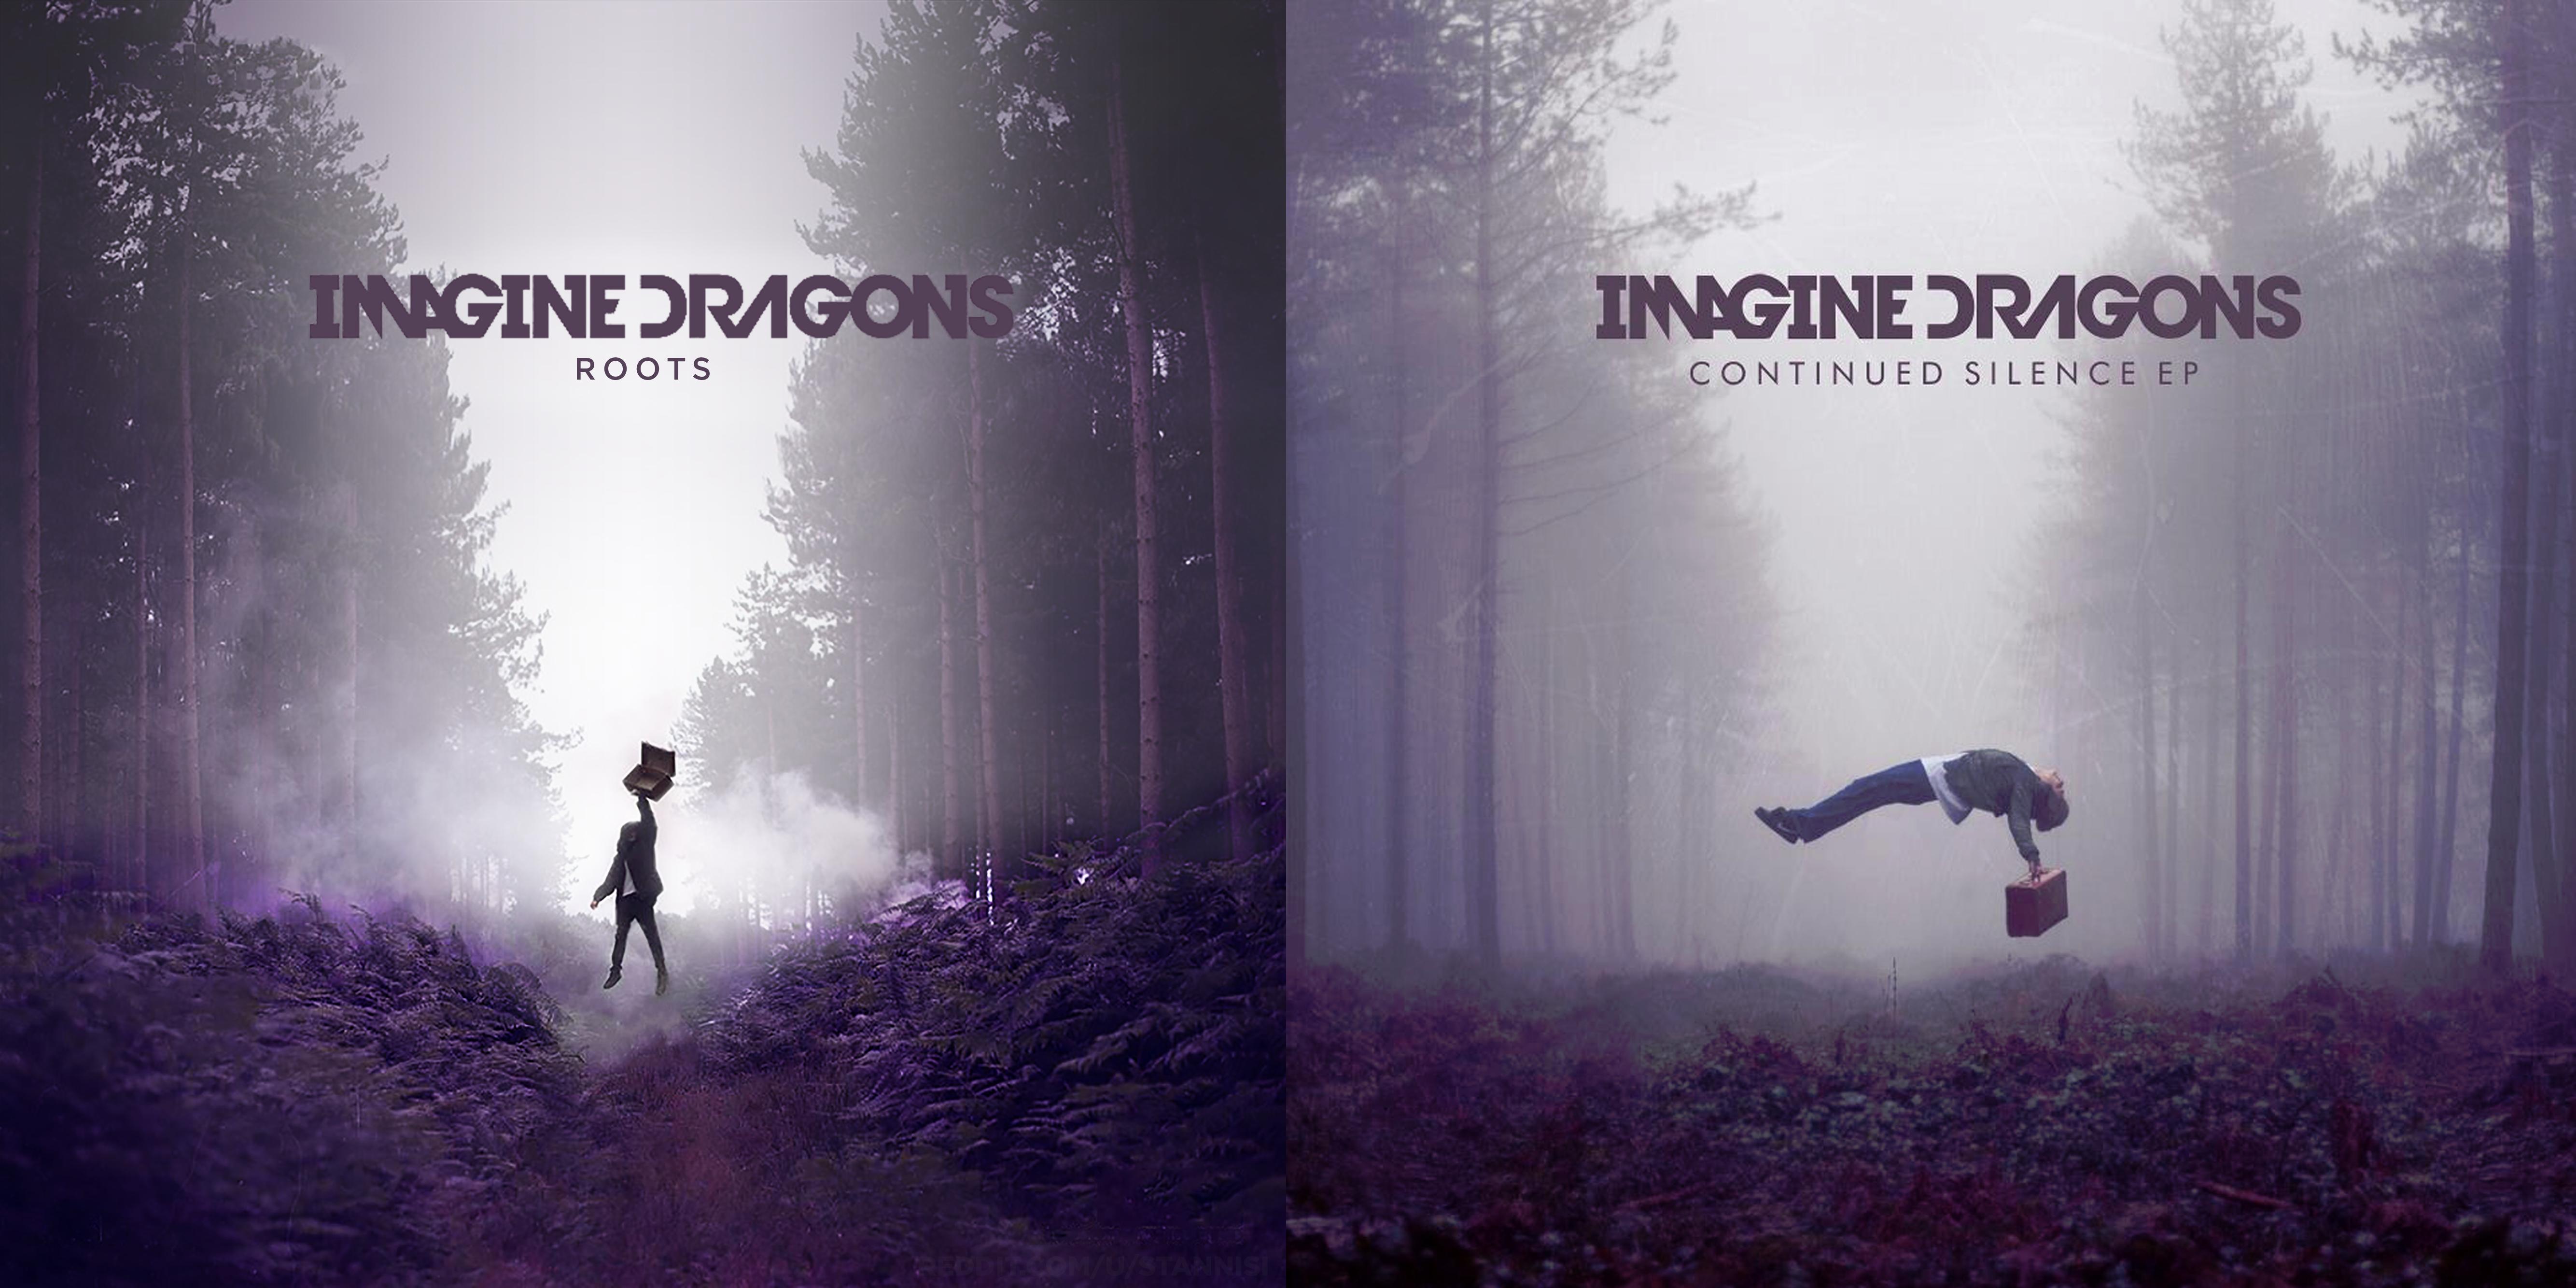 Imagine Dragons Continued Silence Ep - HD Wallpaper 